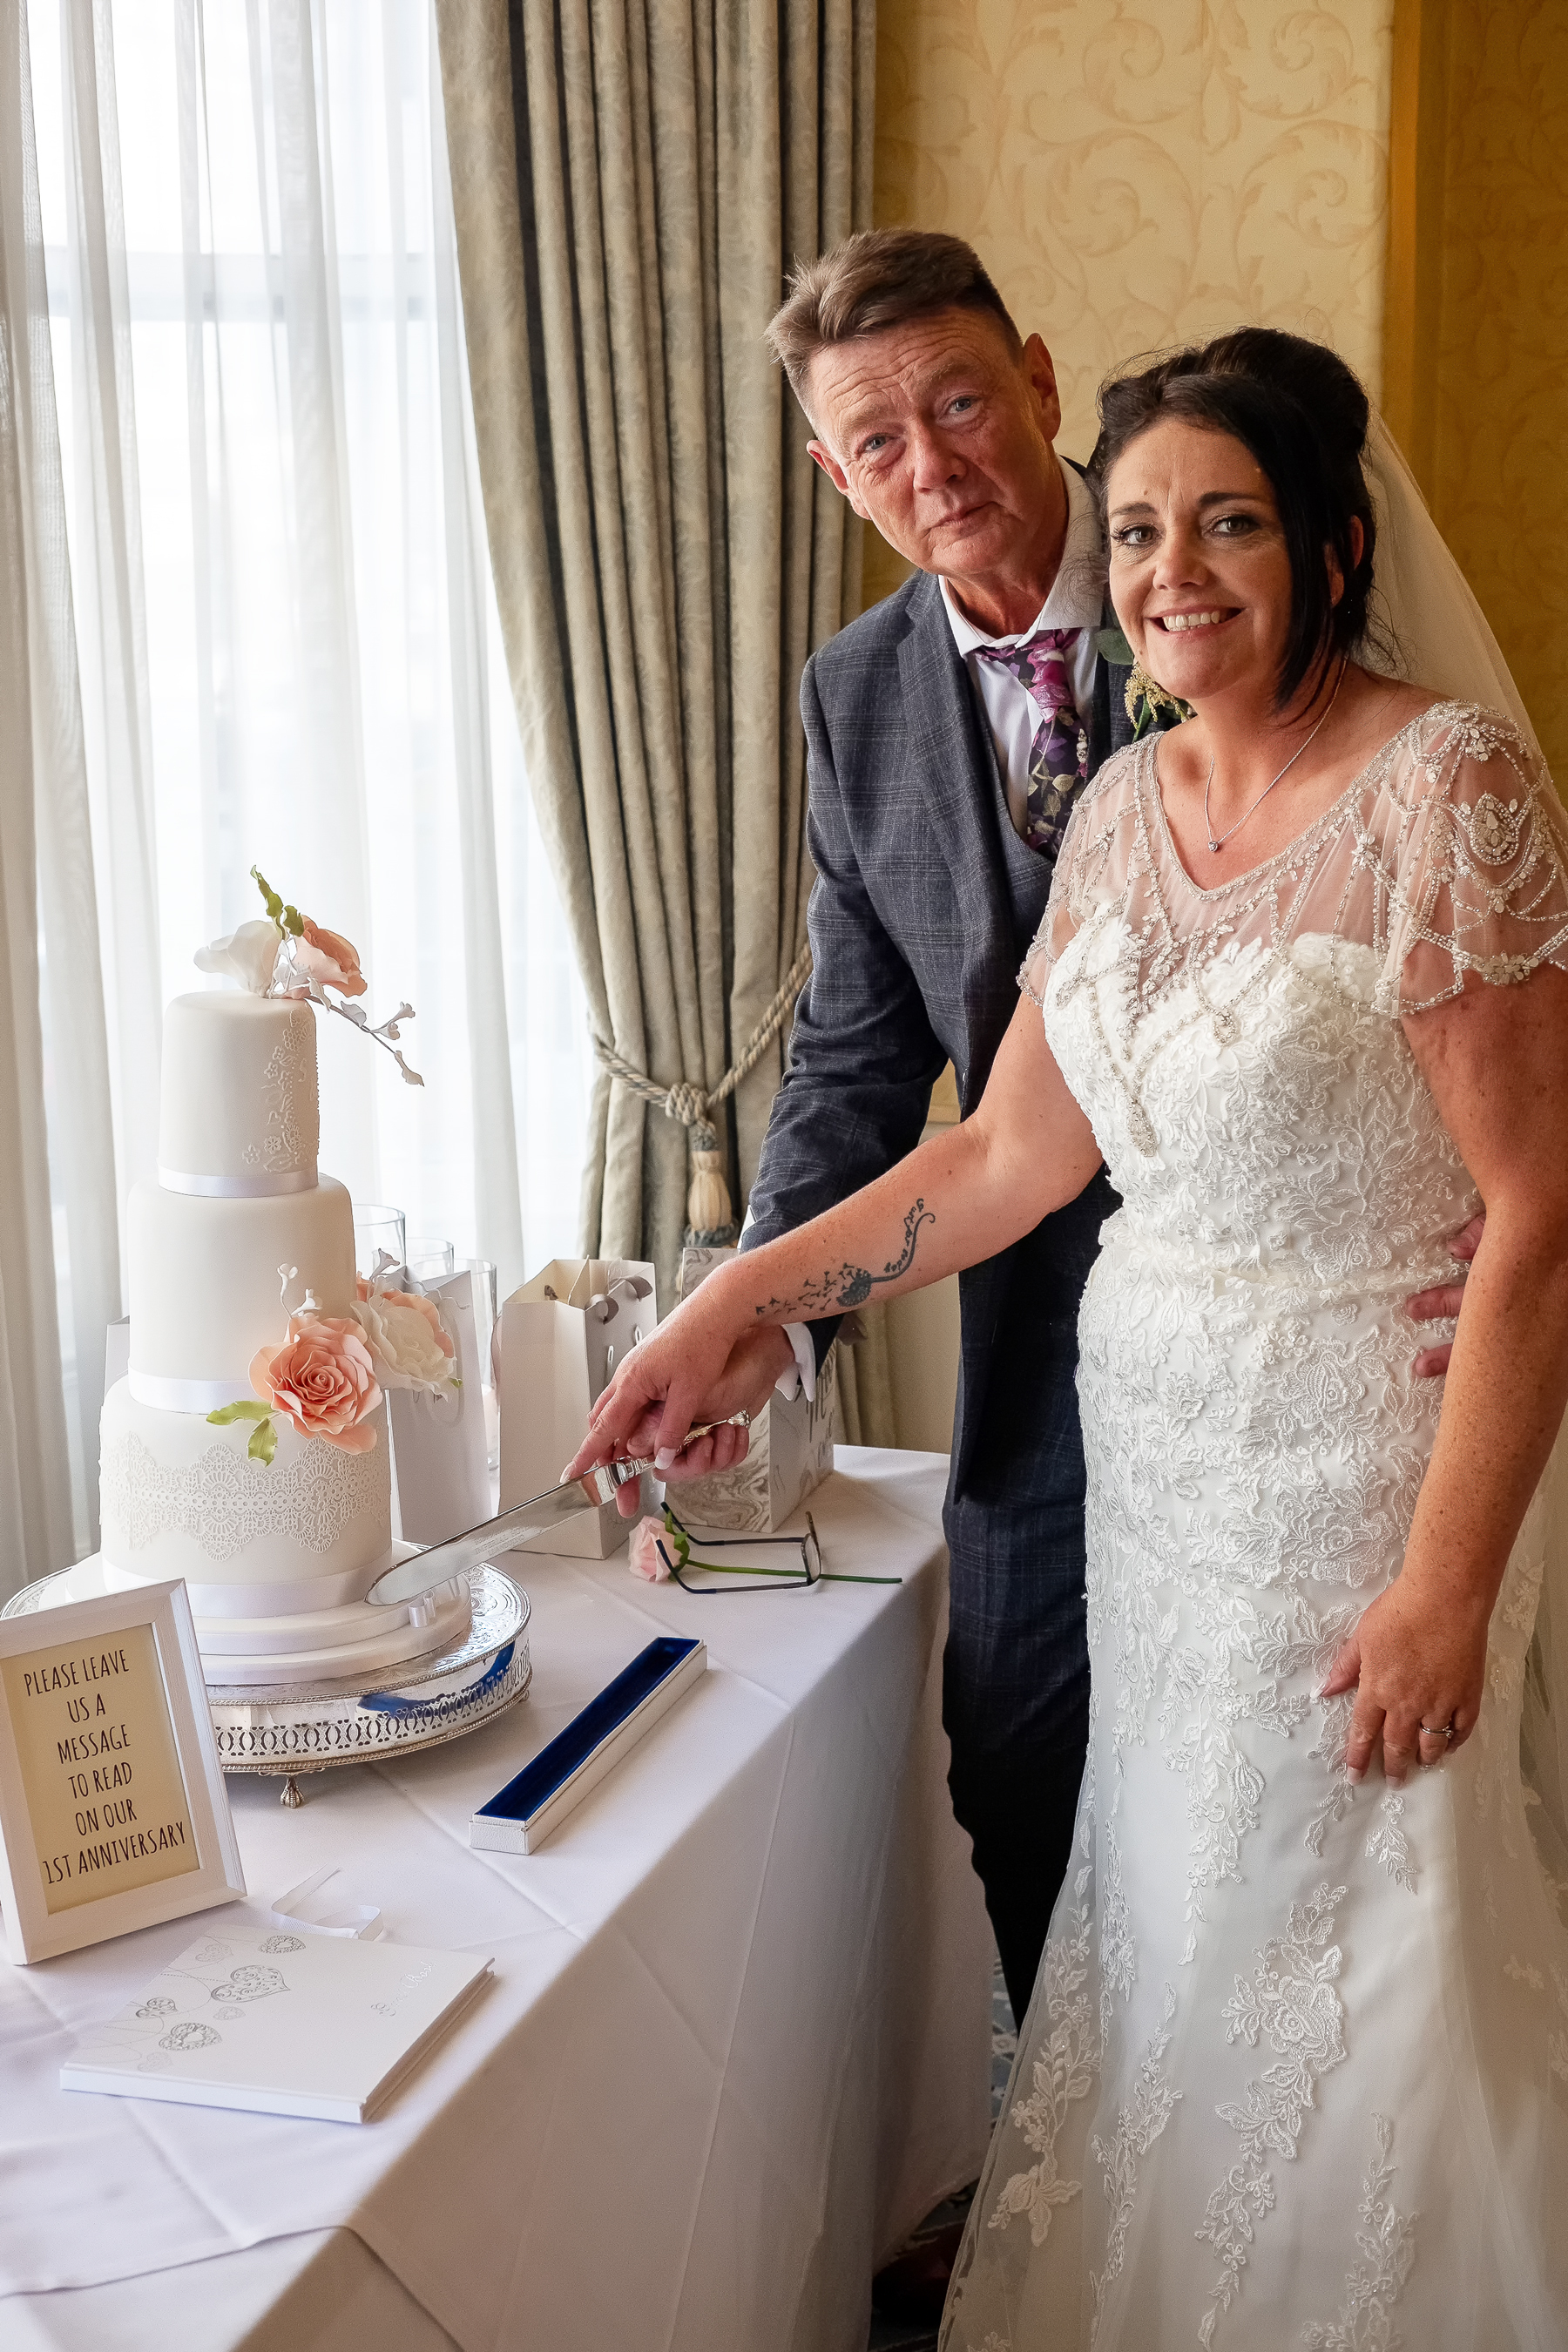 Cutting the cake! Picture: Phil Rogers